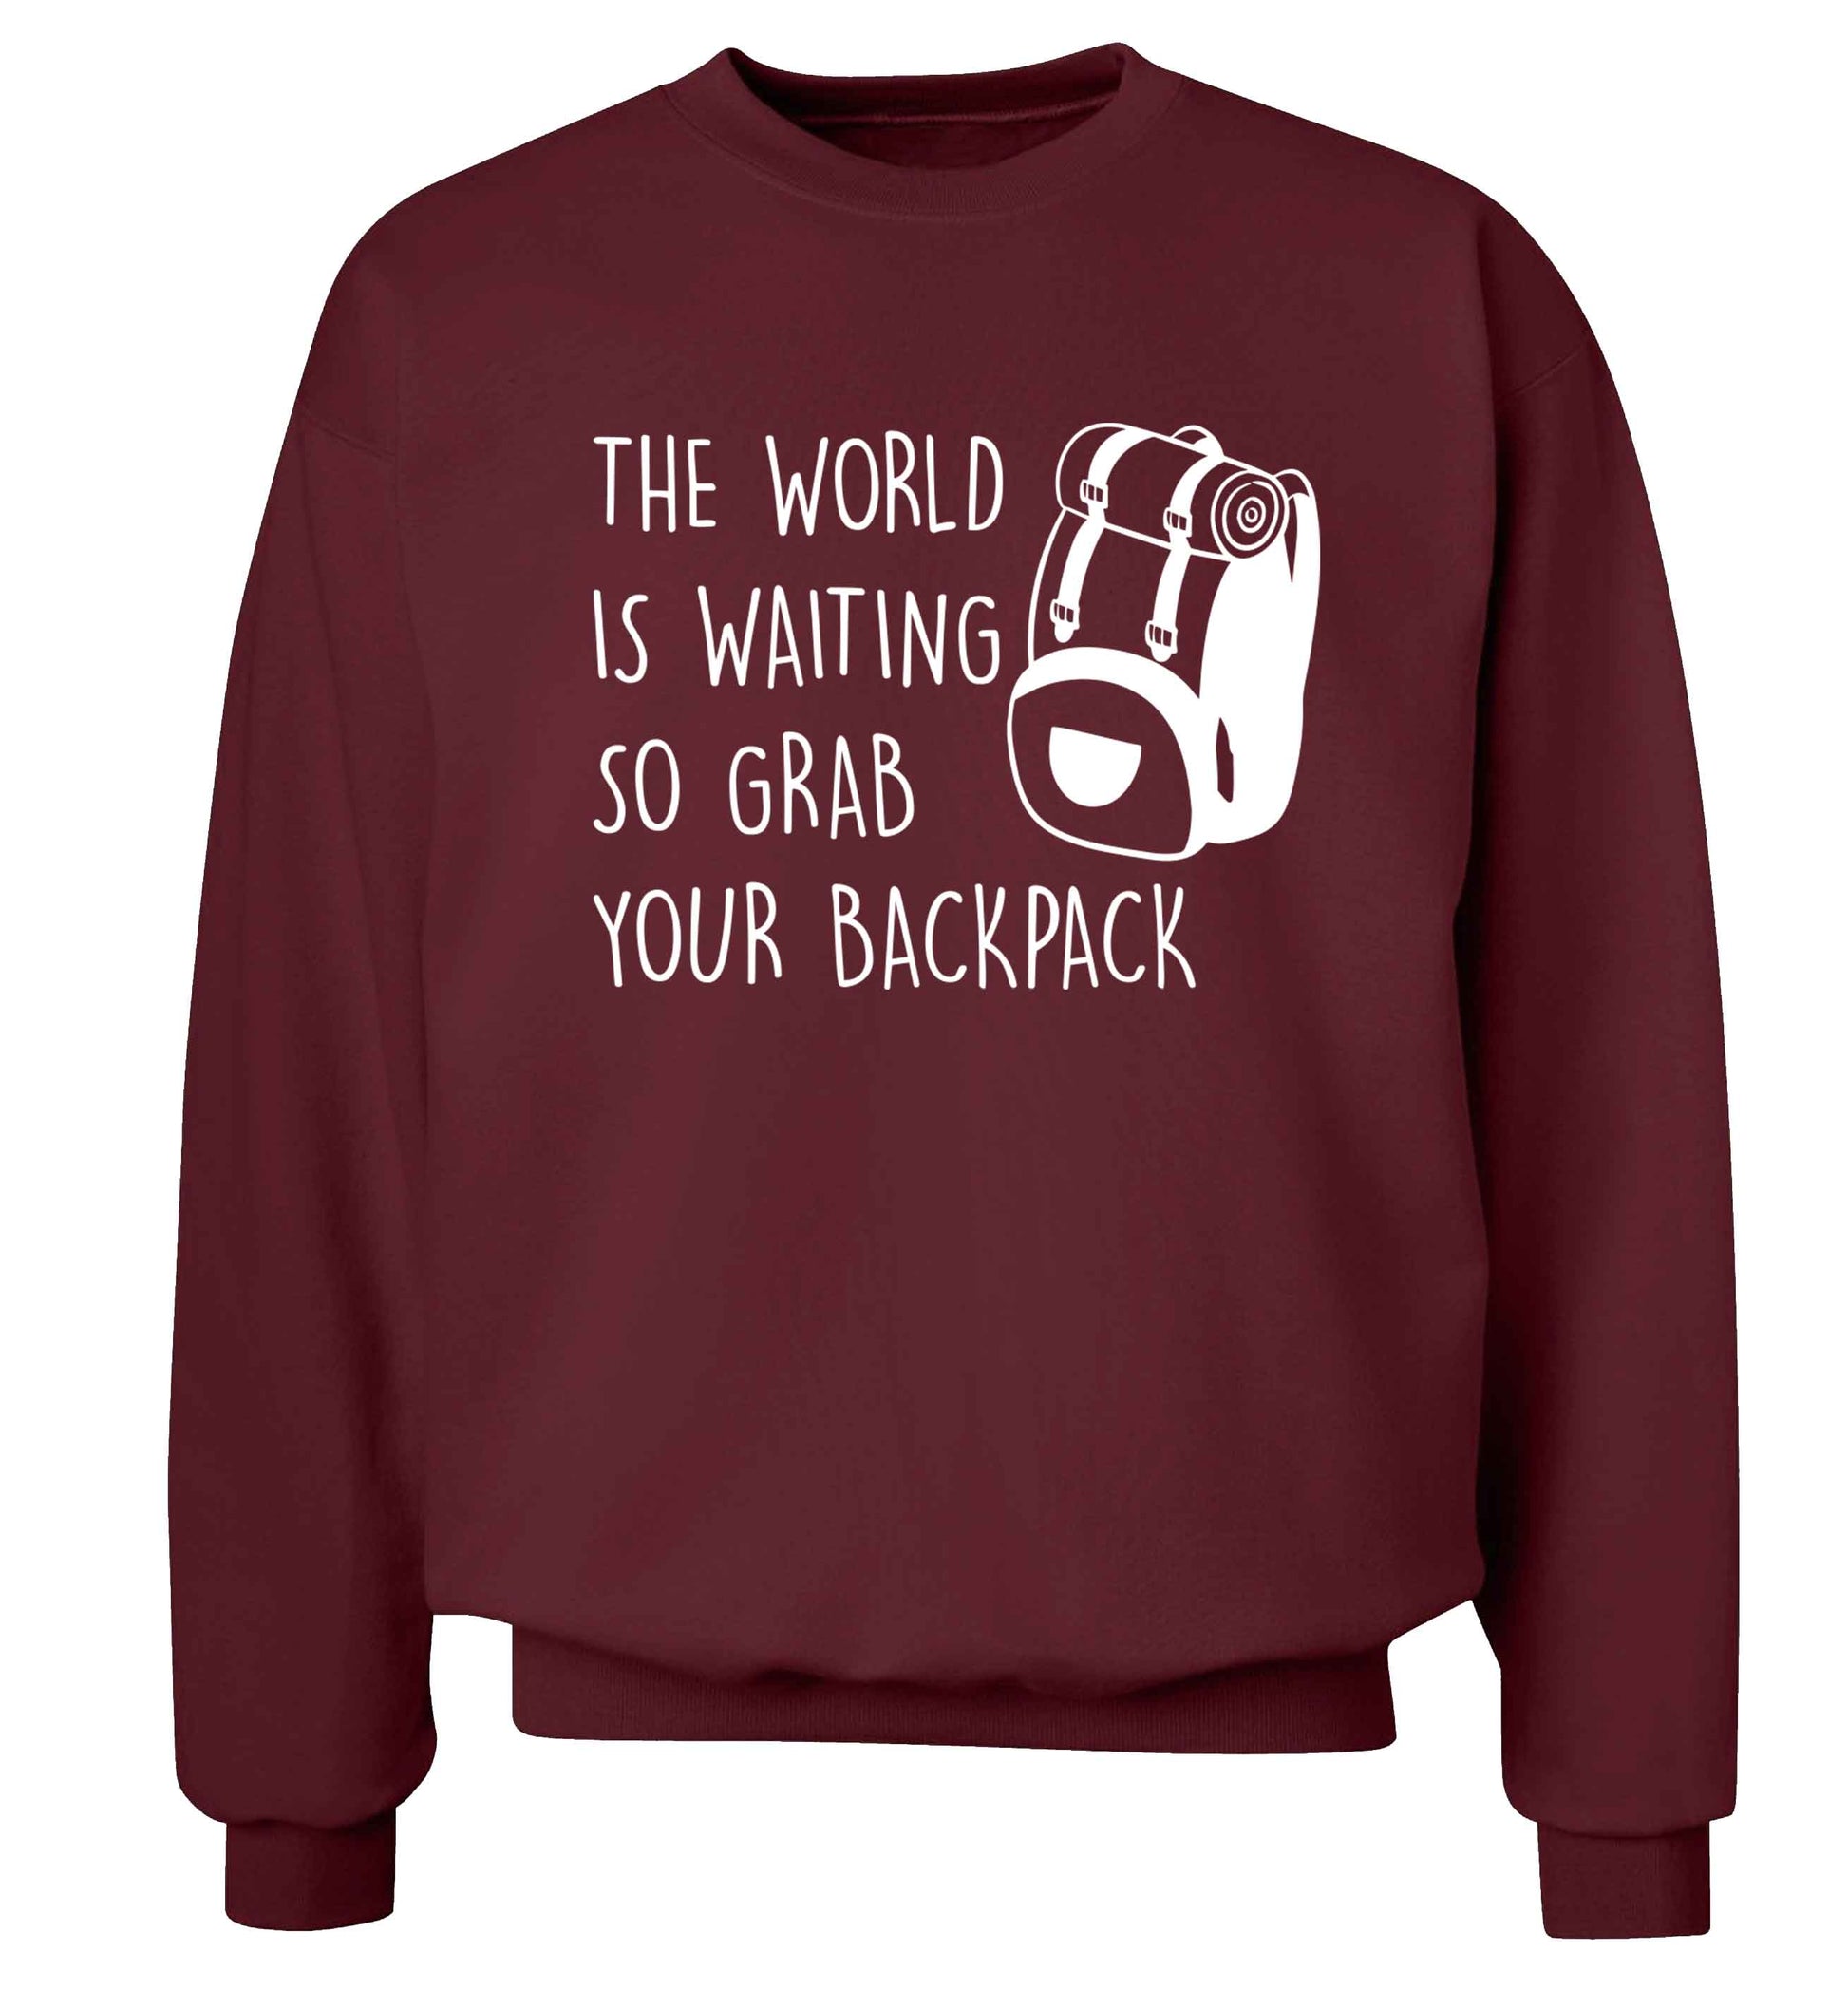 The world is waiting so grab your backpack Adult's unisex maroon Sweater 2XL